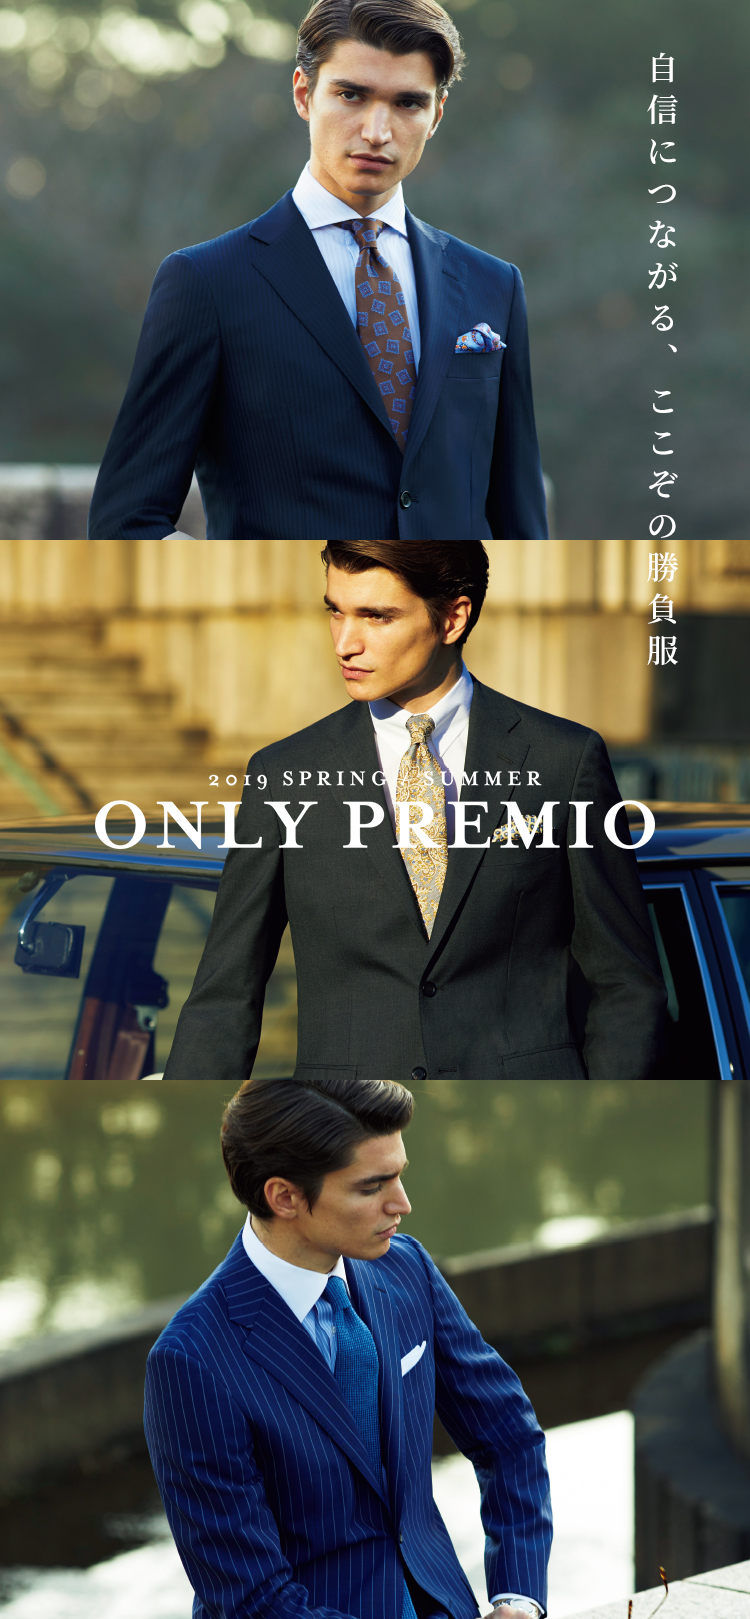 2019 SPRING SUMMER ONLY PREMIO│ONLY